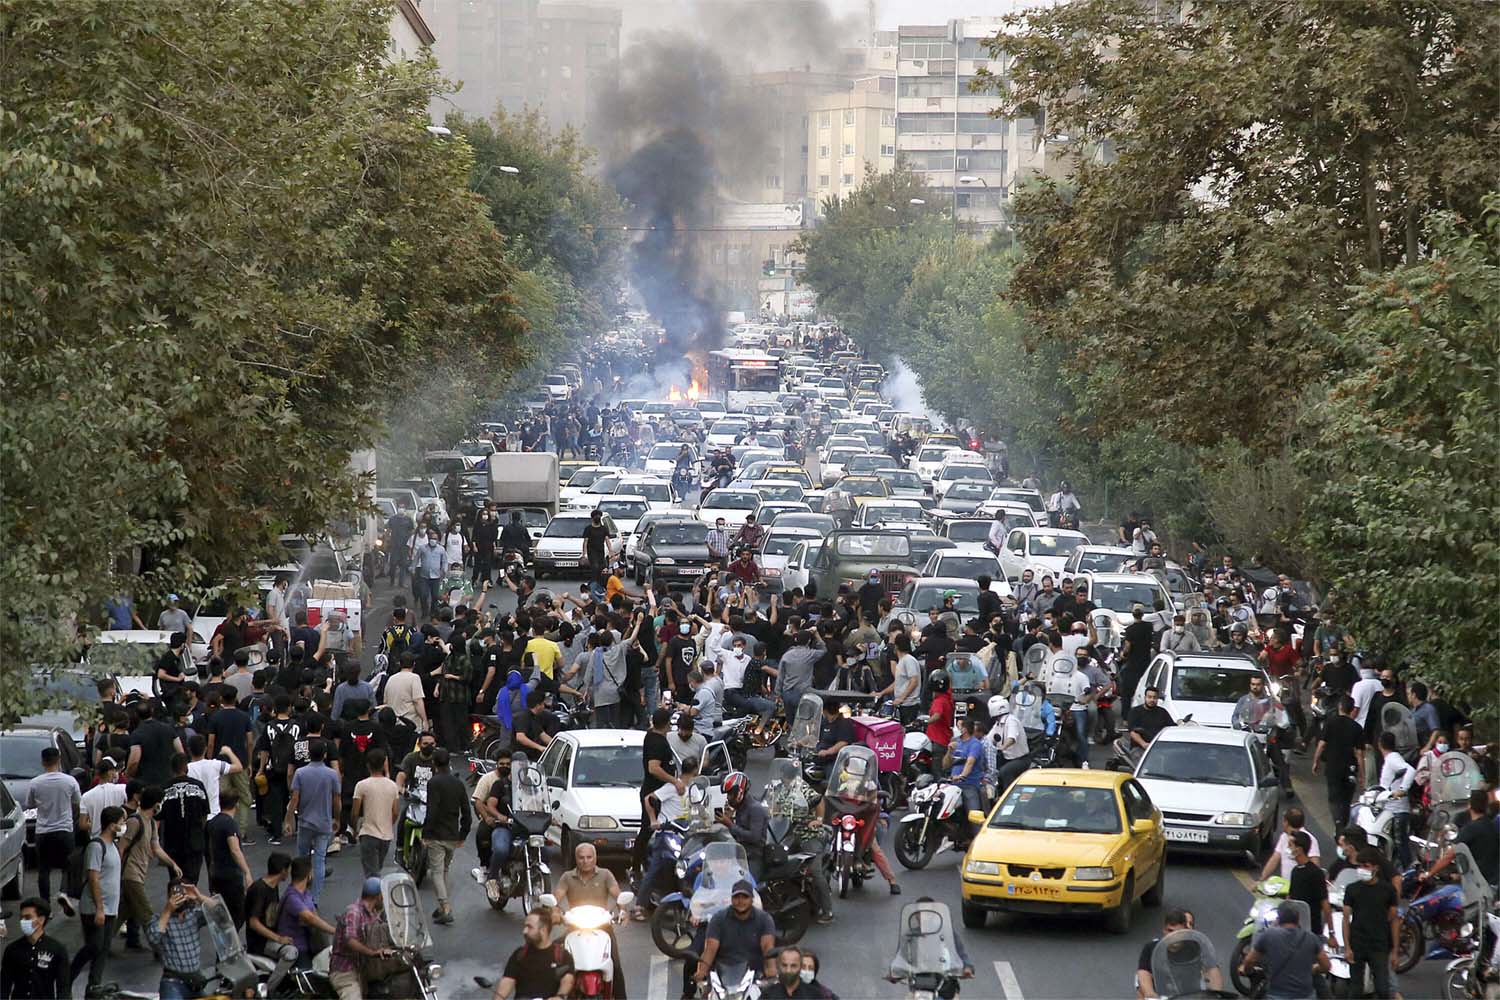 Protests continue unabated across Iran